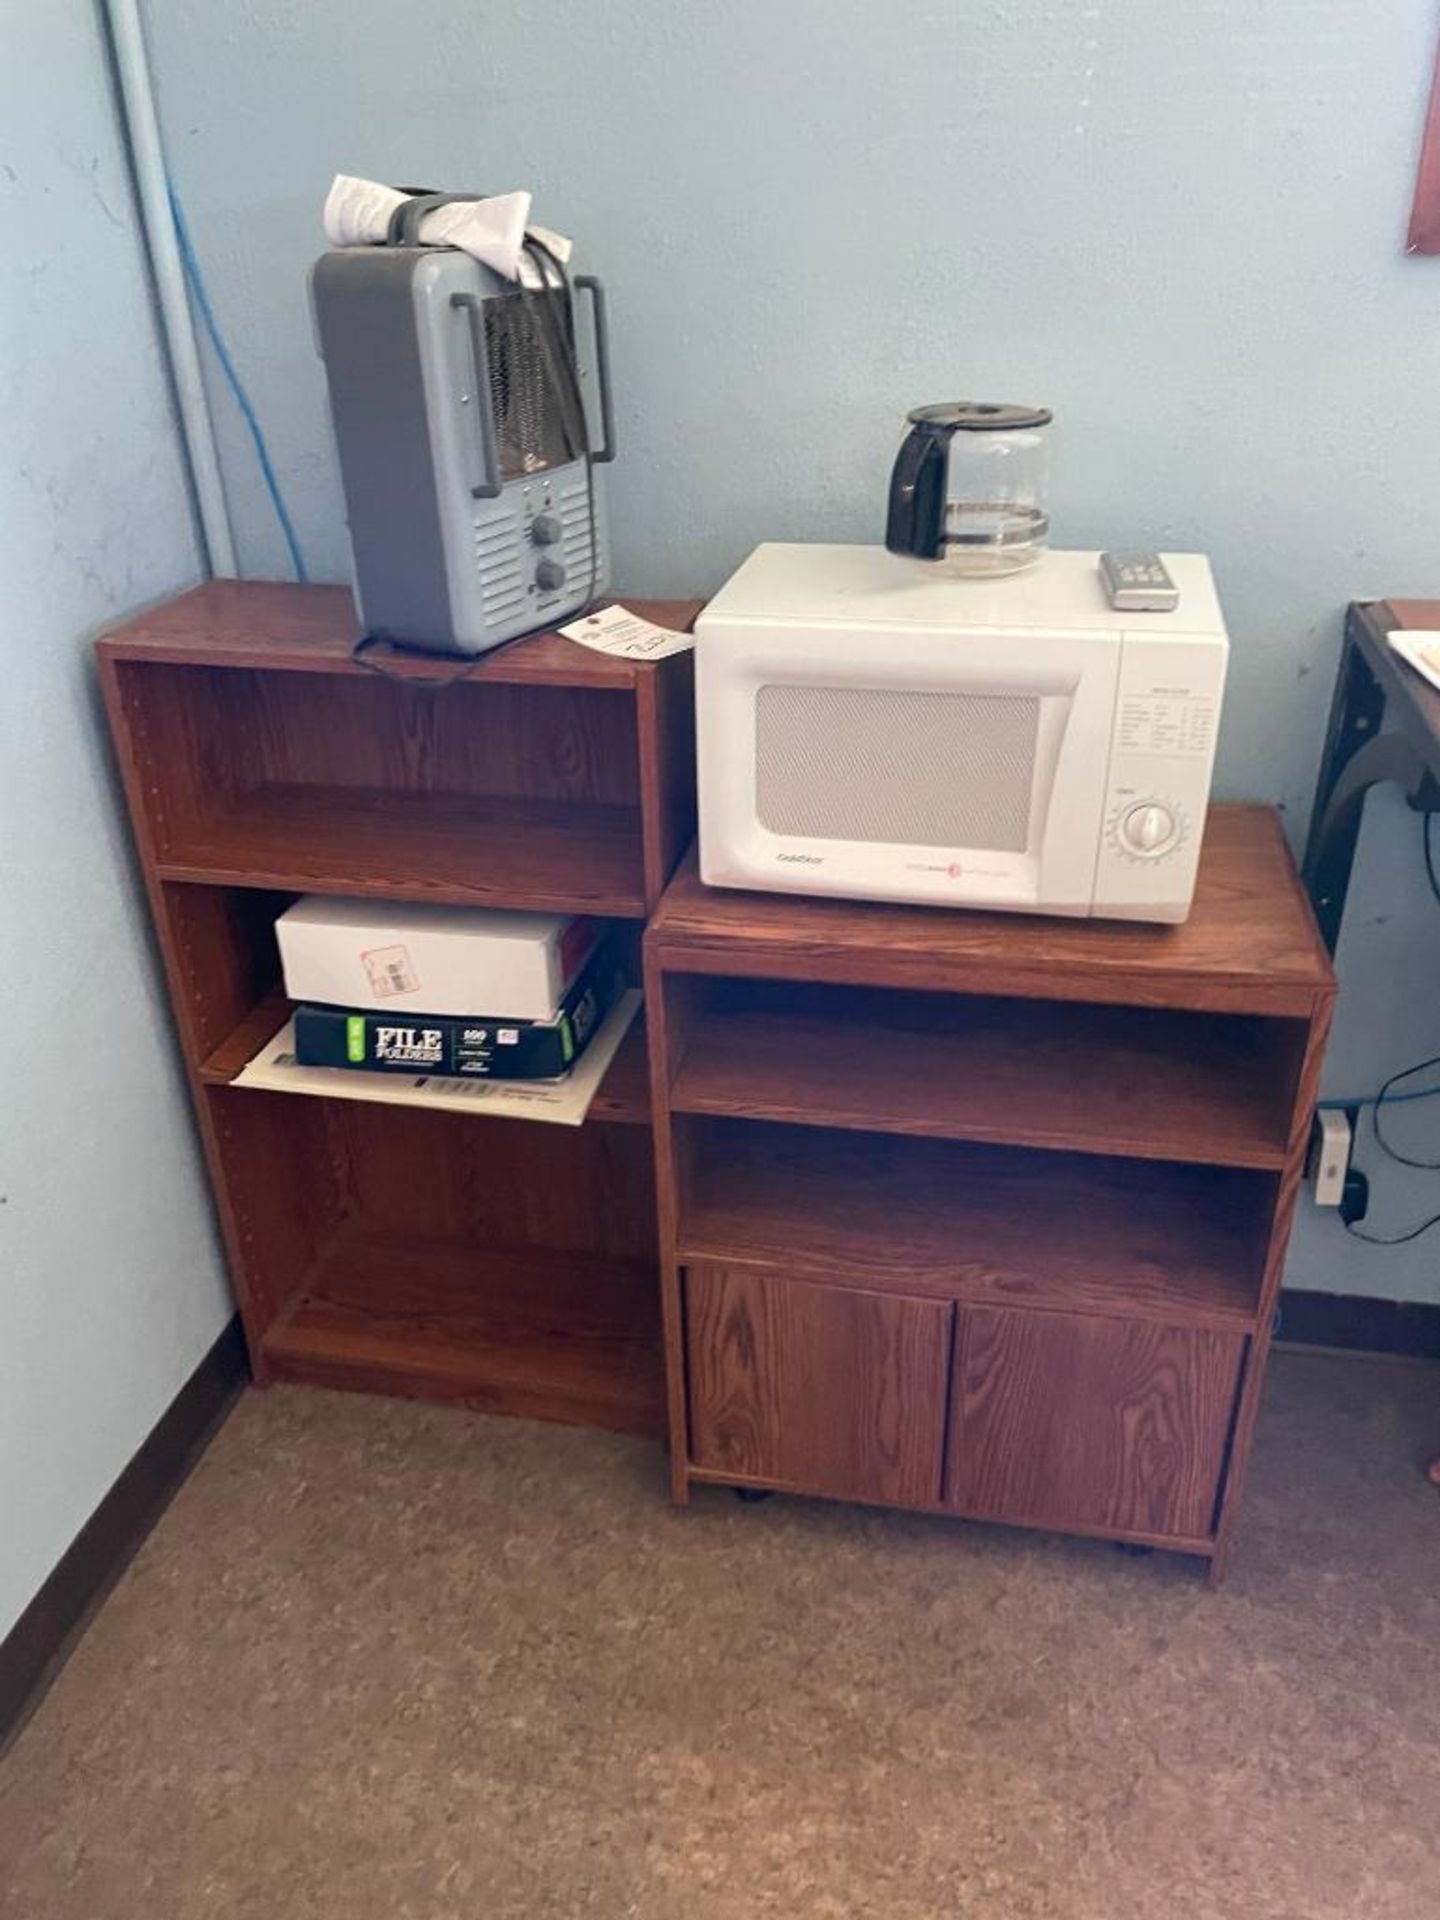 MICROWAVE AND WOODEN SHELVES WITH CONTENTS